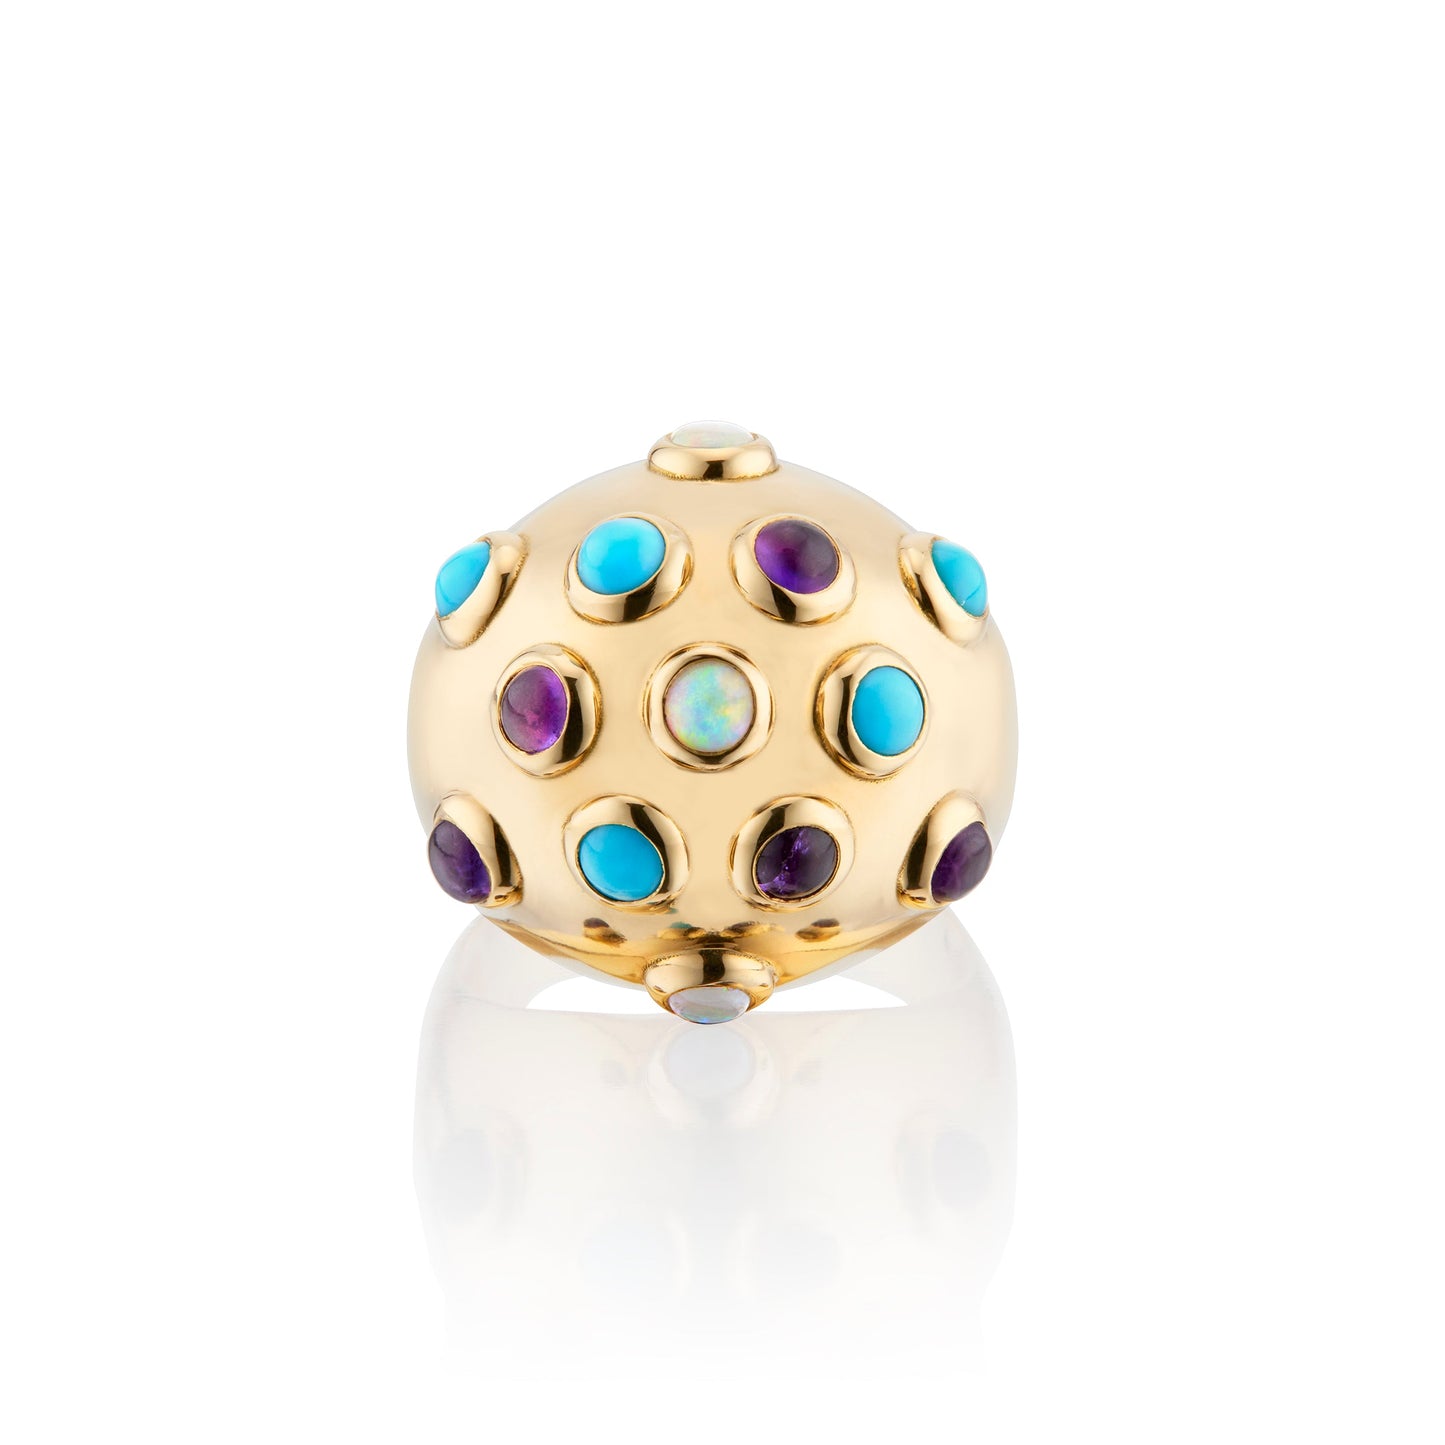 Deco Dome Ring with Opals, Amethysts and Turquoise Gemstones